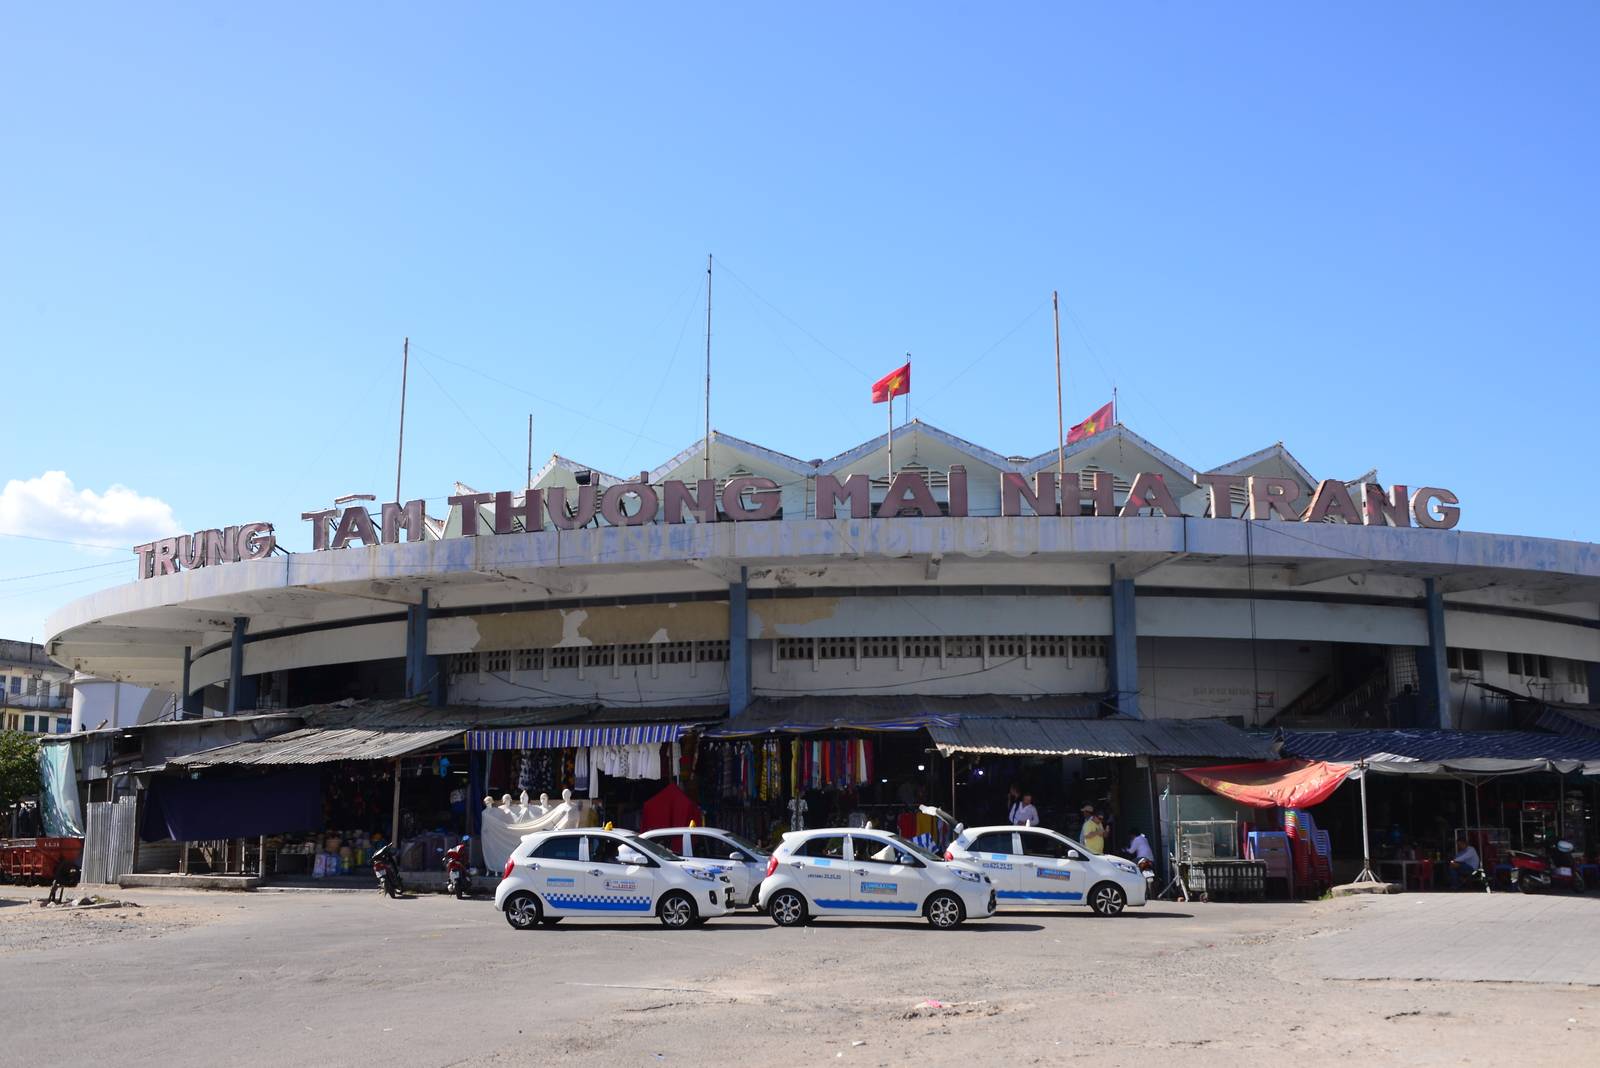 Nha Trang Dam Market is located at Ben Cho, Van Thanh, Nha Trang. This is the largest market of Nha Trang city. by ideation90